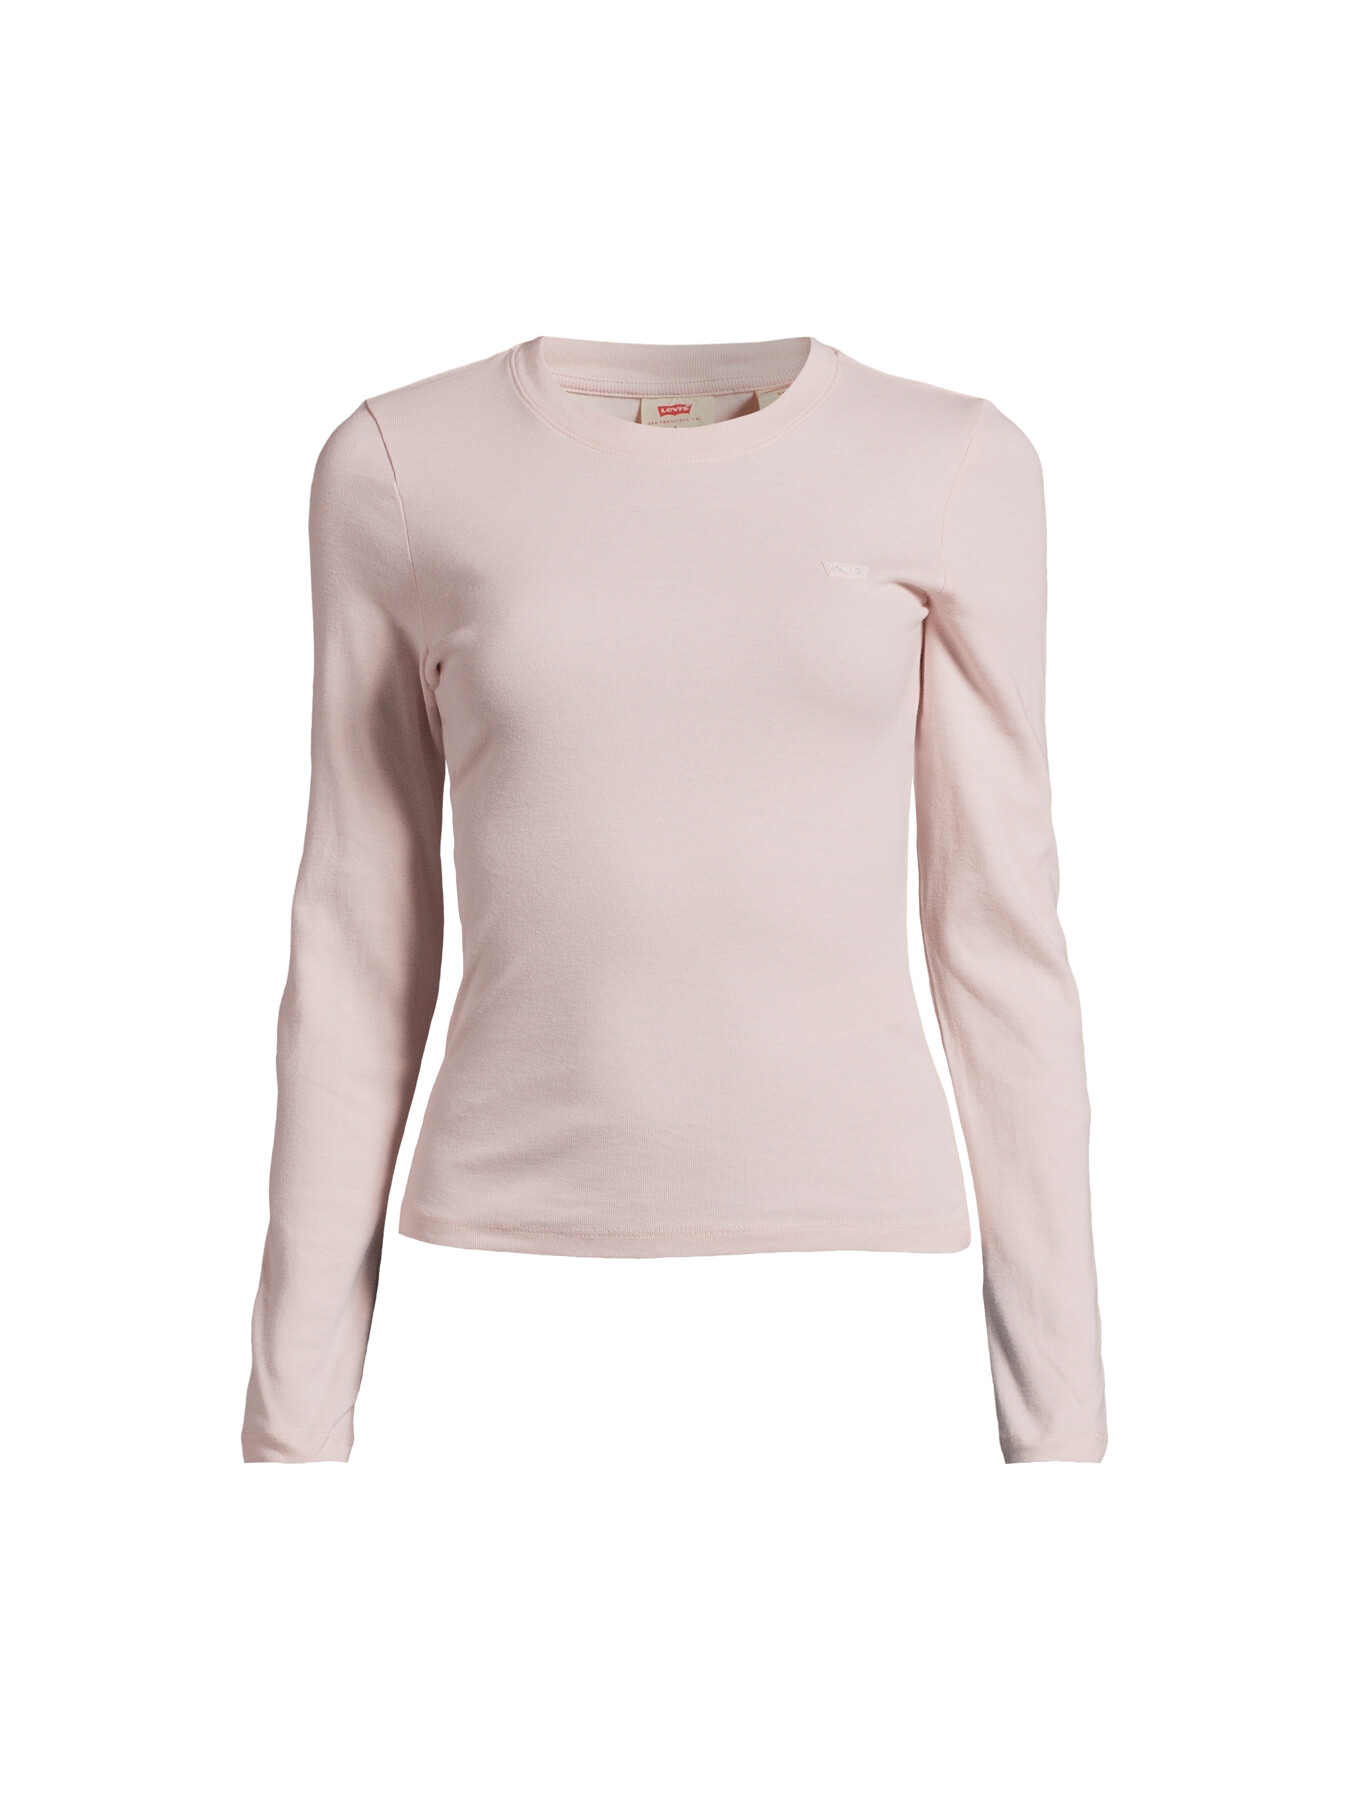 Levi's Women's Long Sleeved Baby Tee In Pink